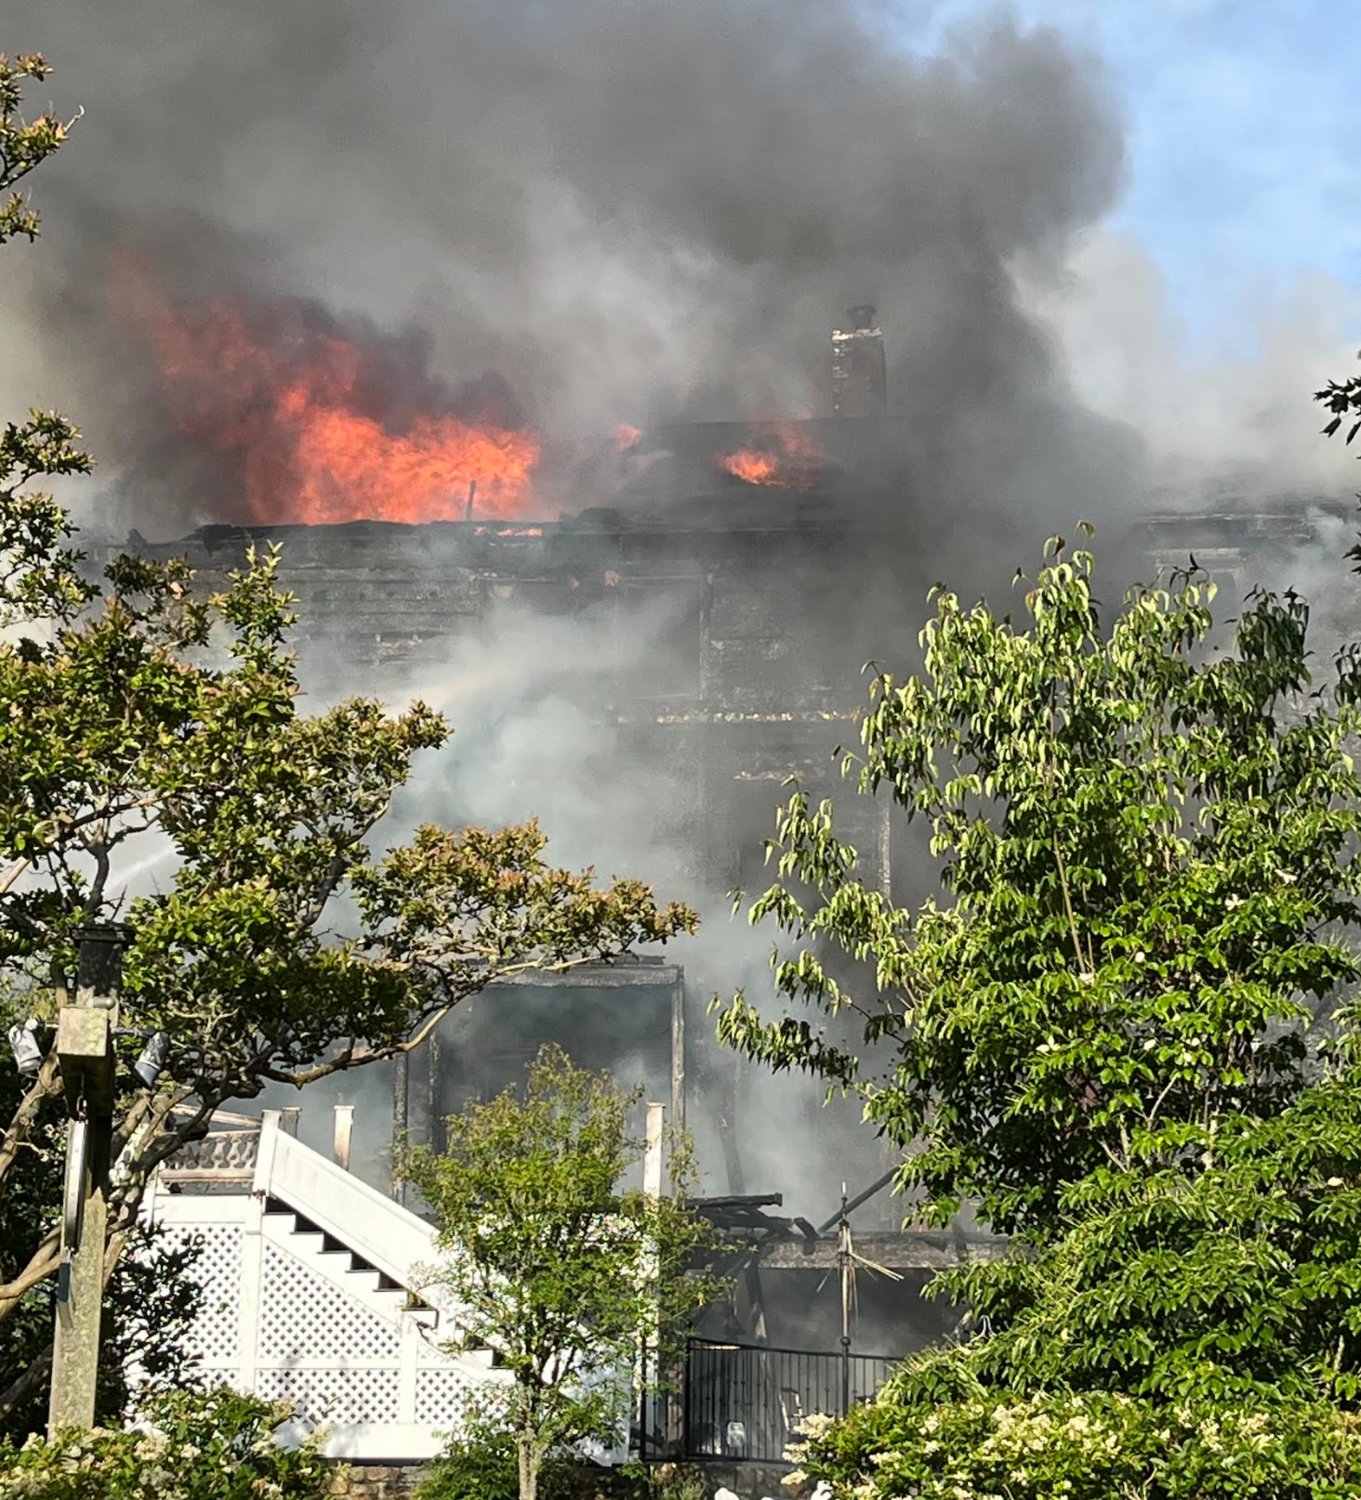 Flames erupt from the Veranda House.